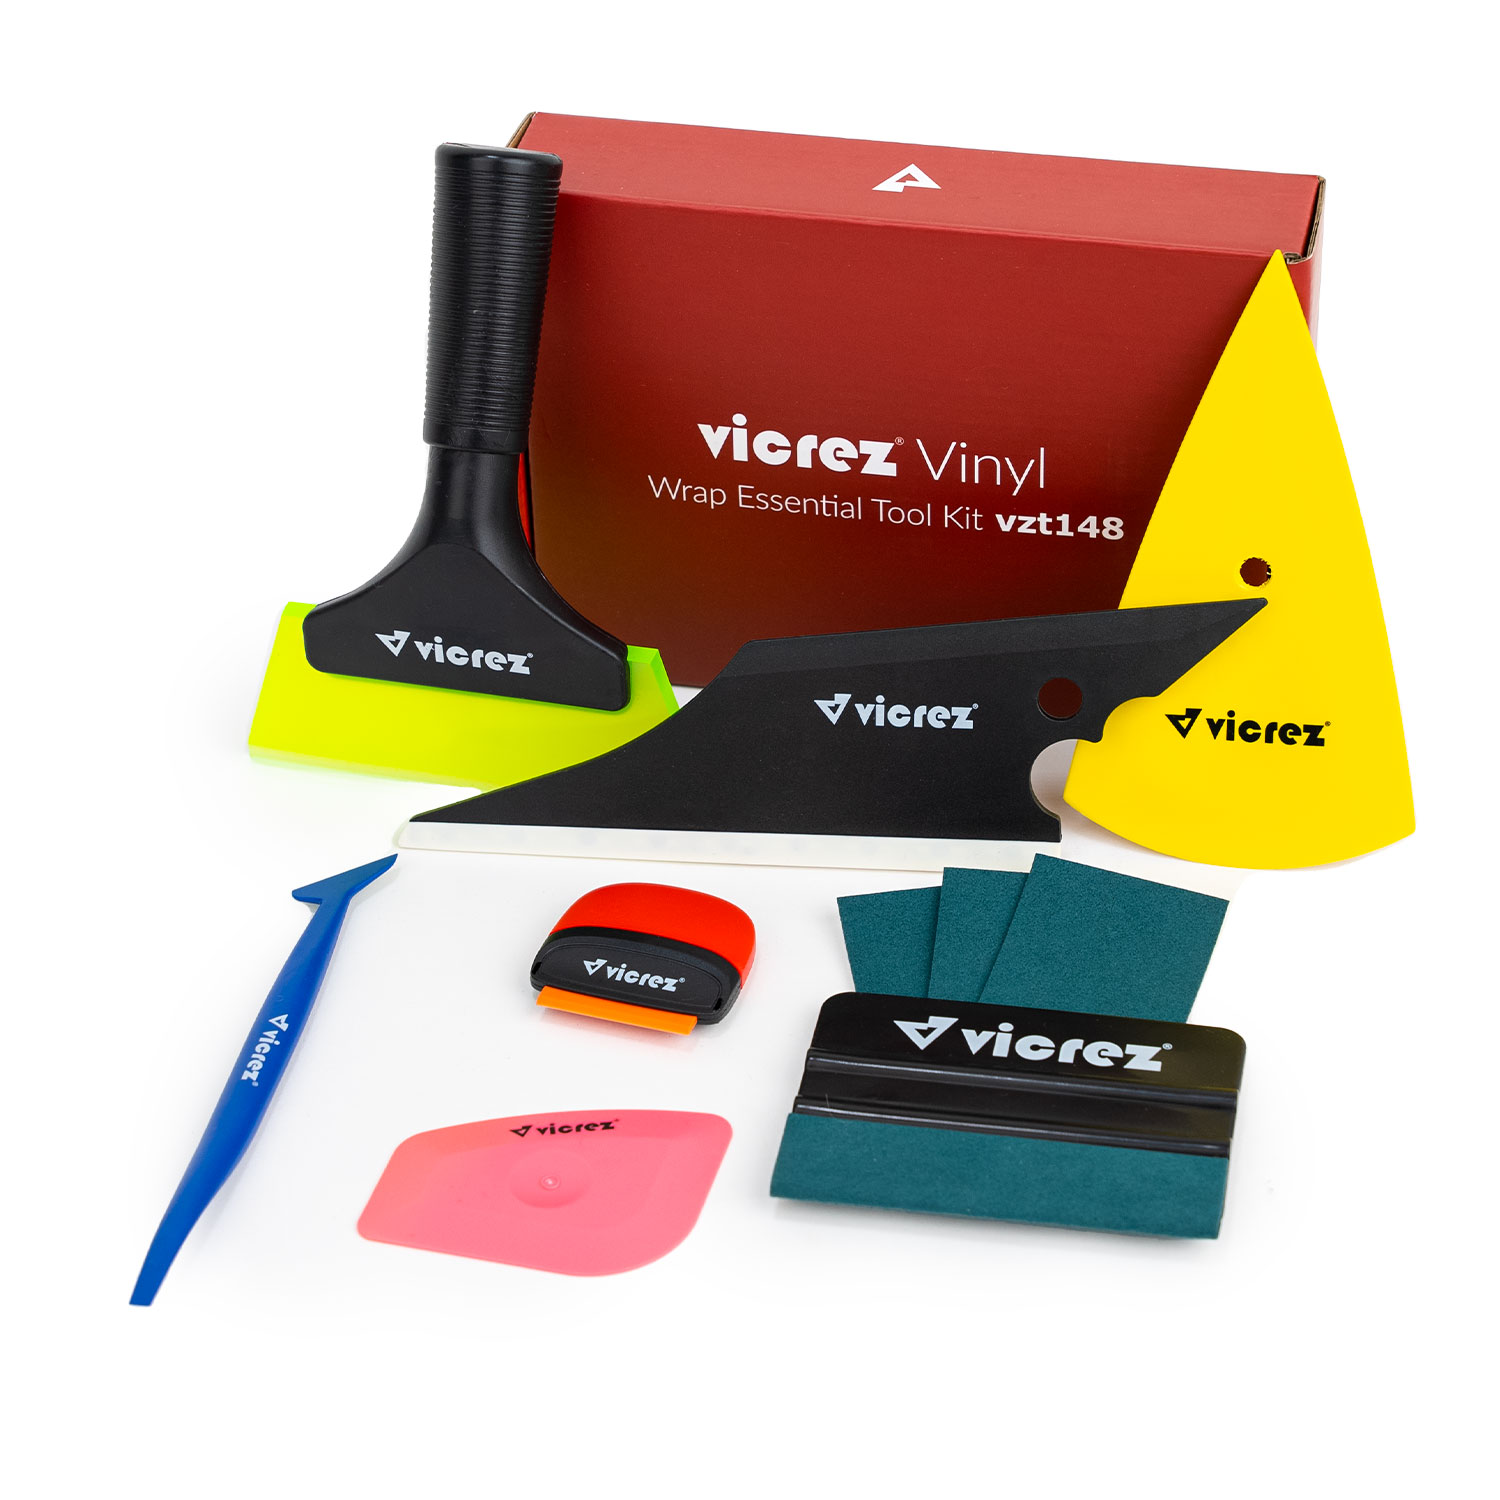 Professional Vinyl Wrap Tool Kit for Glass Protective Film Installing Window Tint Application Including Heat Gun, Squeegees, Vinyl Magnet, Work